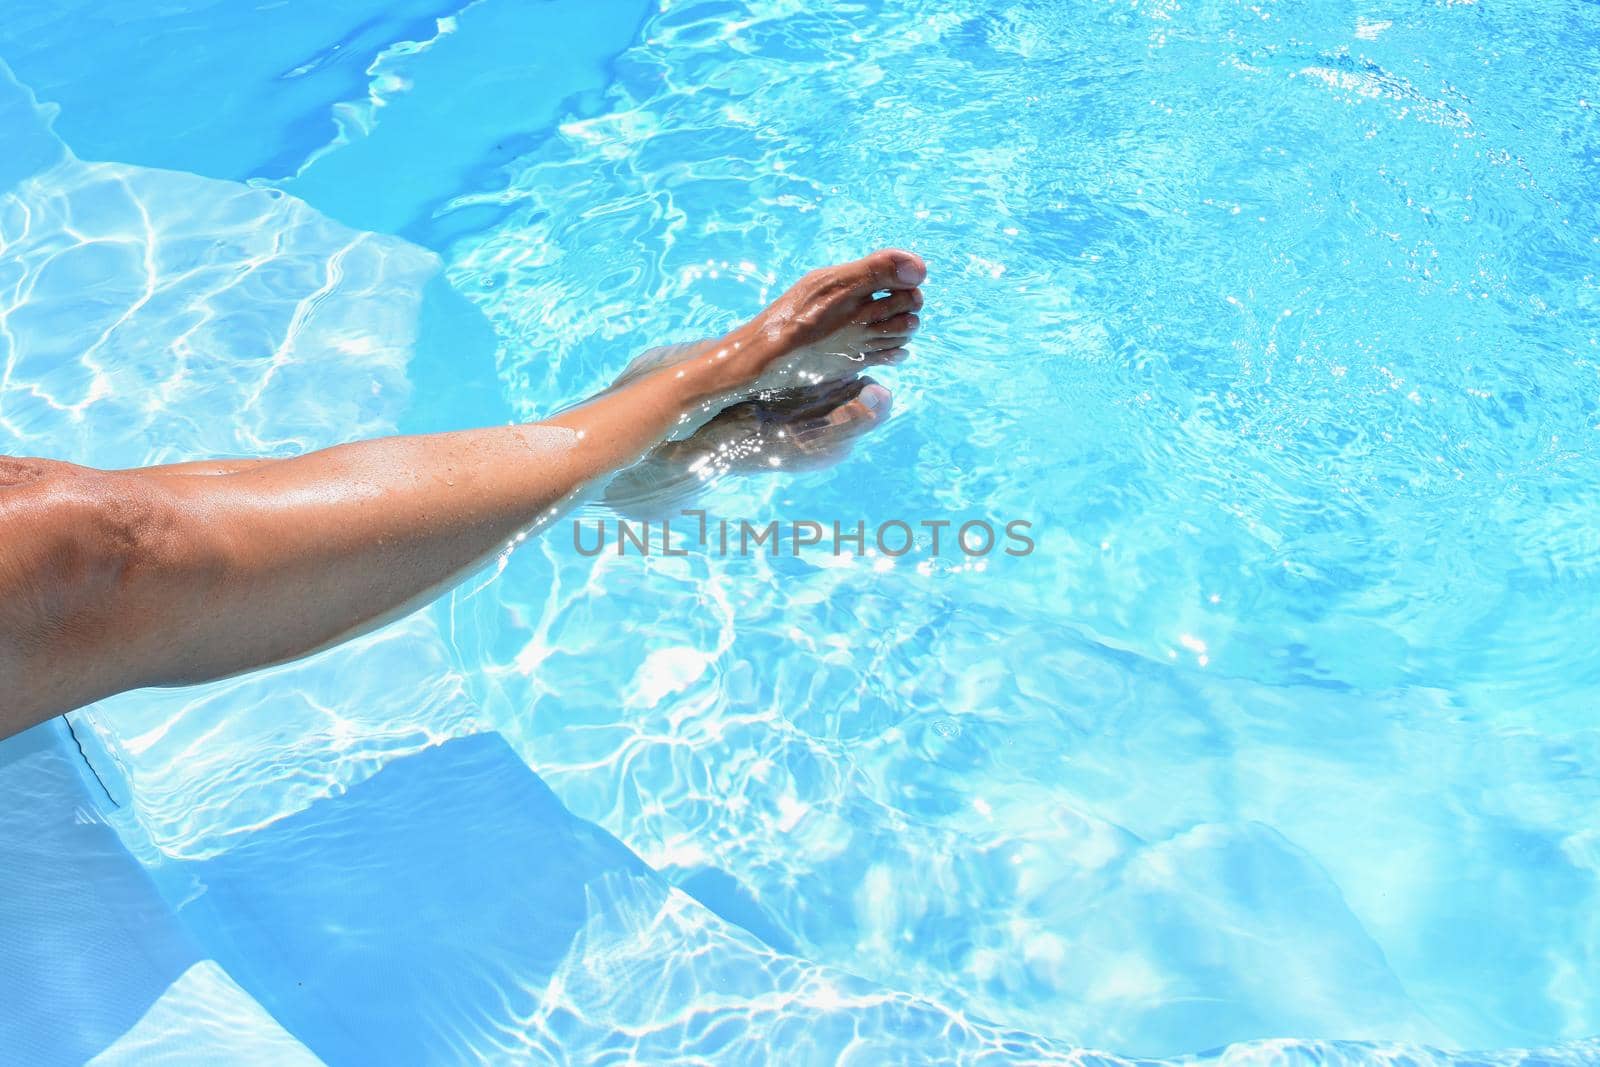 Legs in the pool with clean water in hot sunny day. Summer background for traveling and vacation. Holiday idyllic.